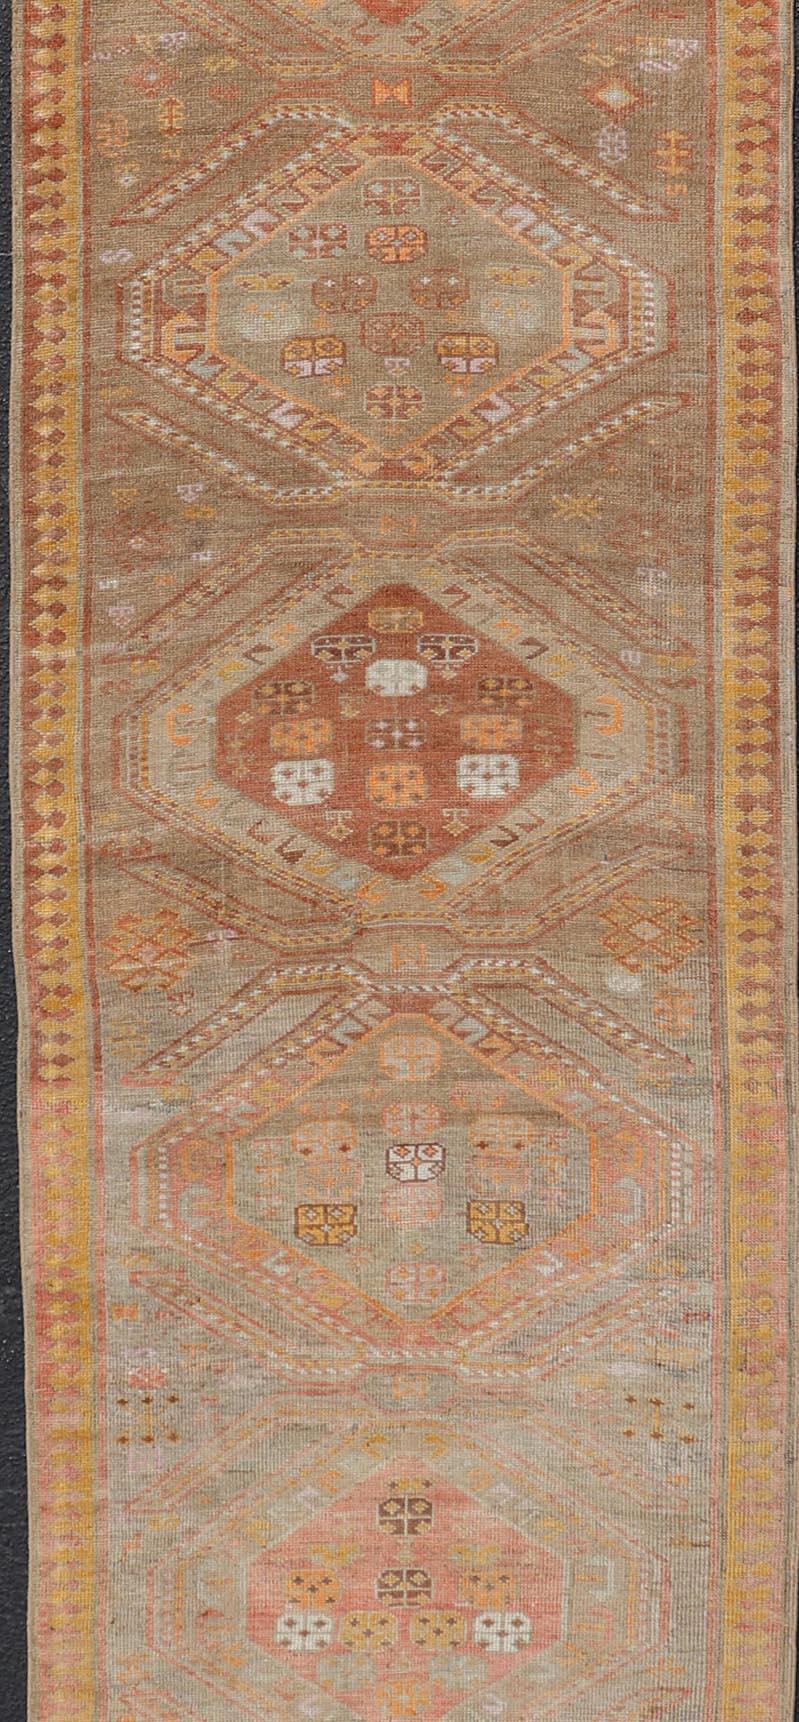 Vintage Turkish Oushak Runner with Tribal Medallions in Brown's, Yellow, and Red In Good Condition For Sale In Atlanta, GA